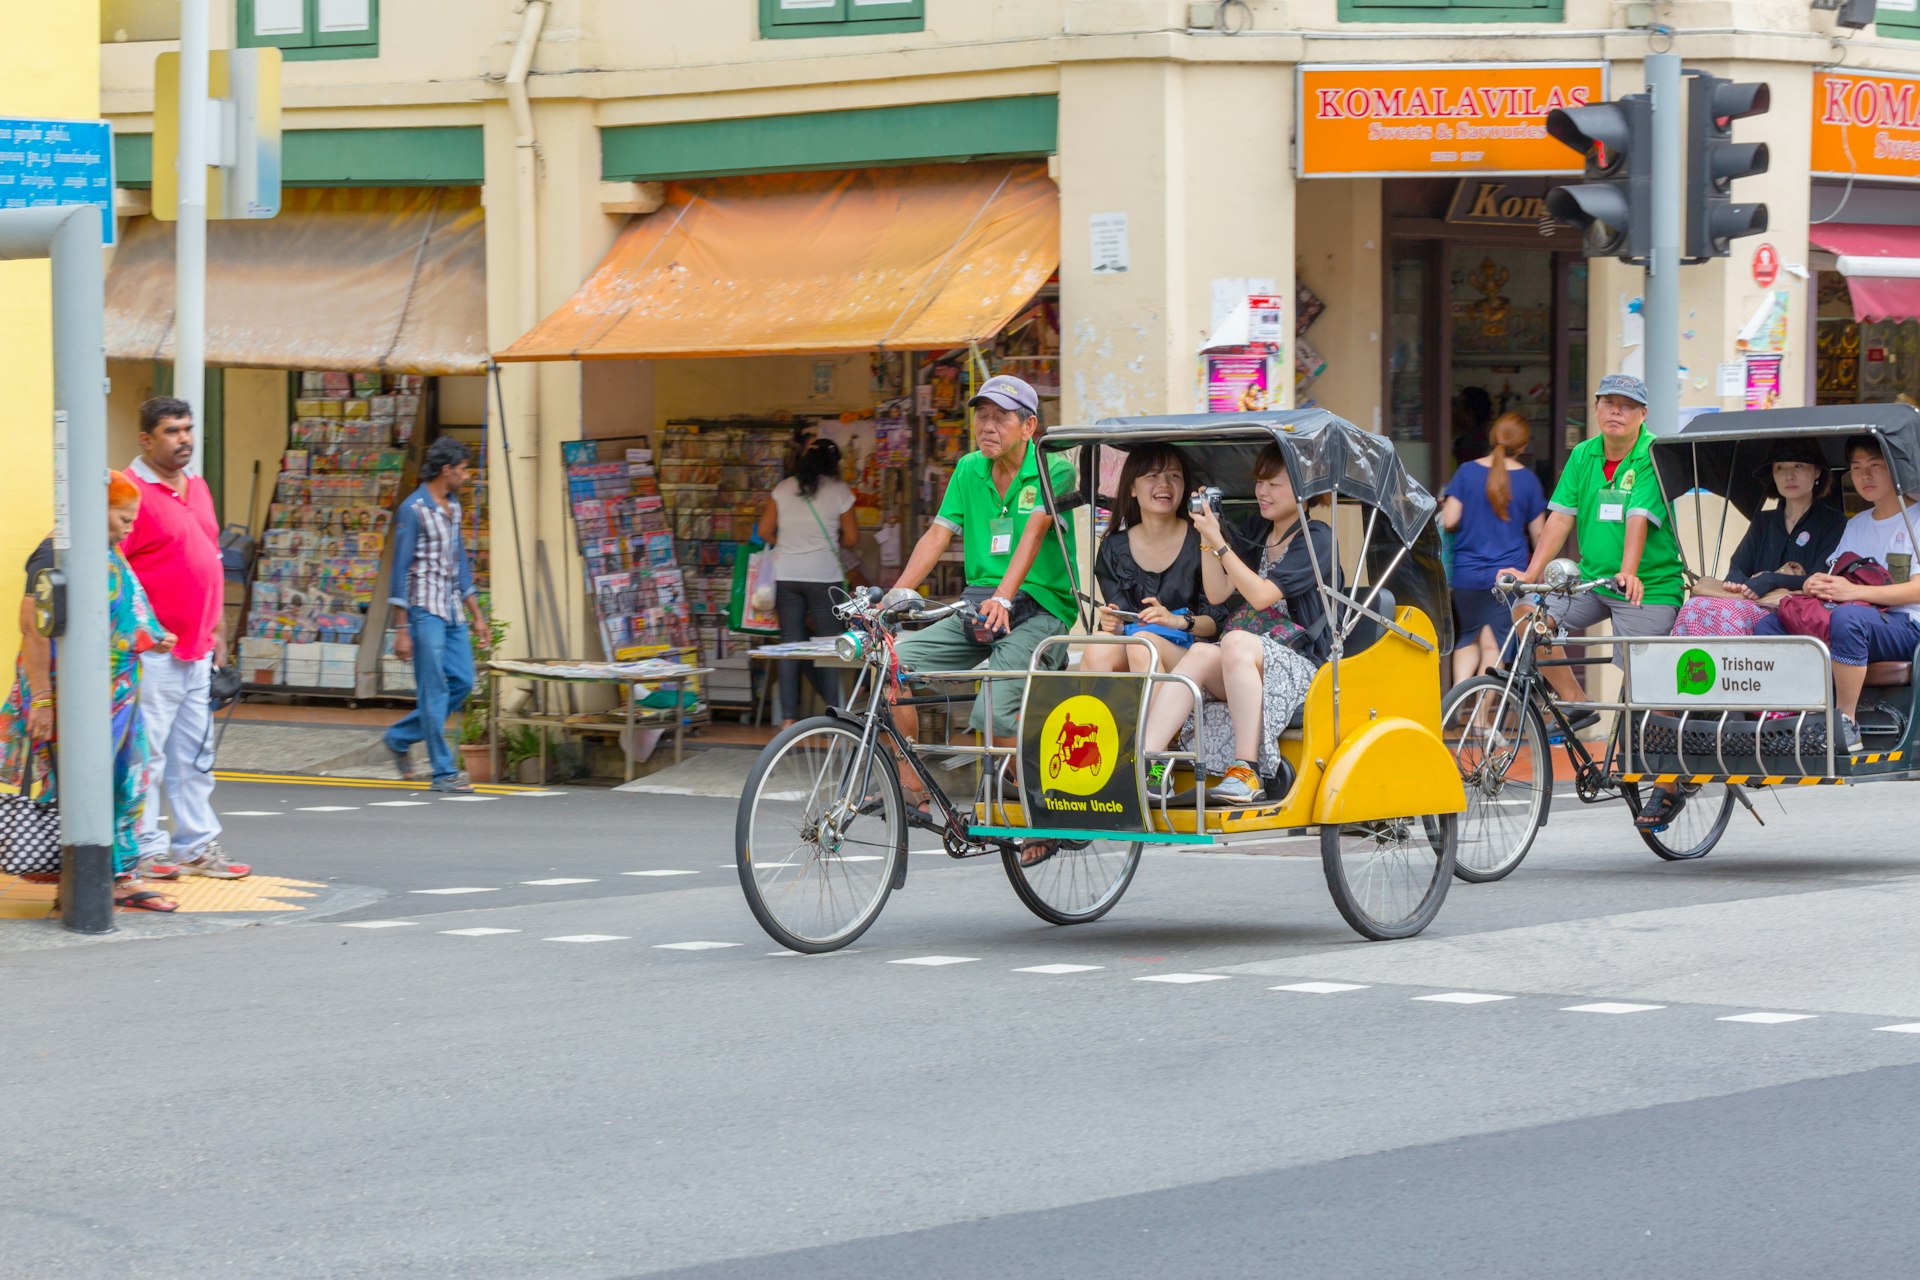 Couples ride on traditional Trishaw Uncle bikes on a Singapore street. 